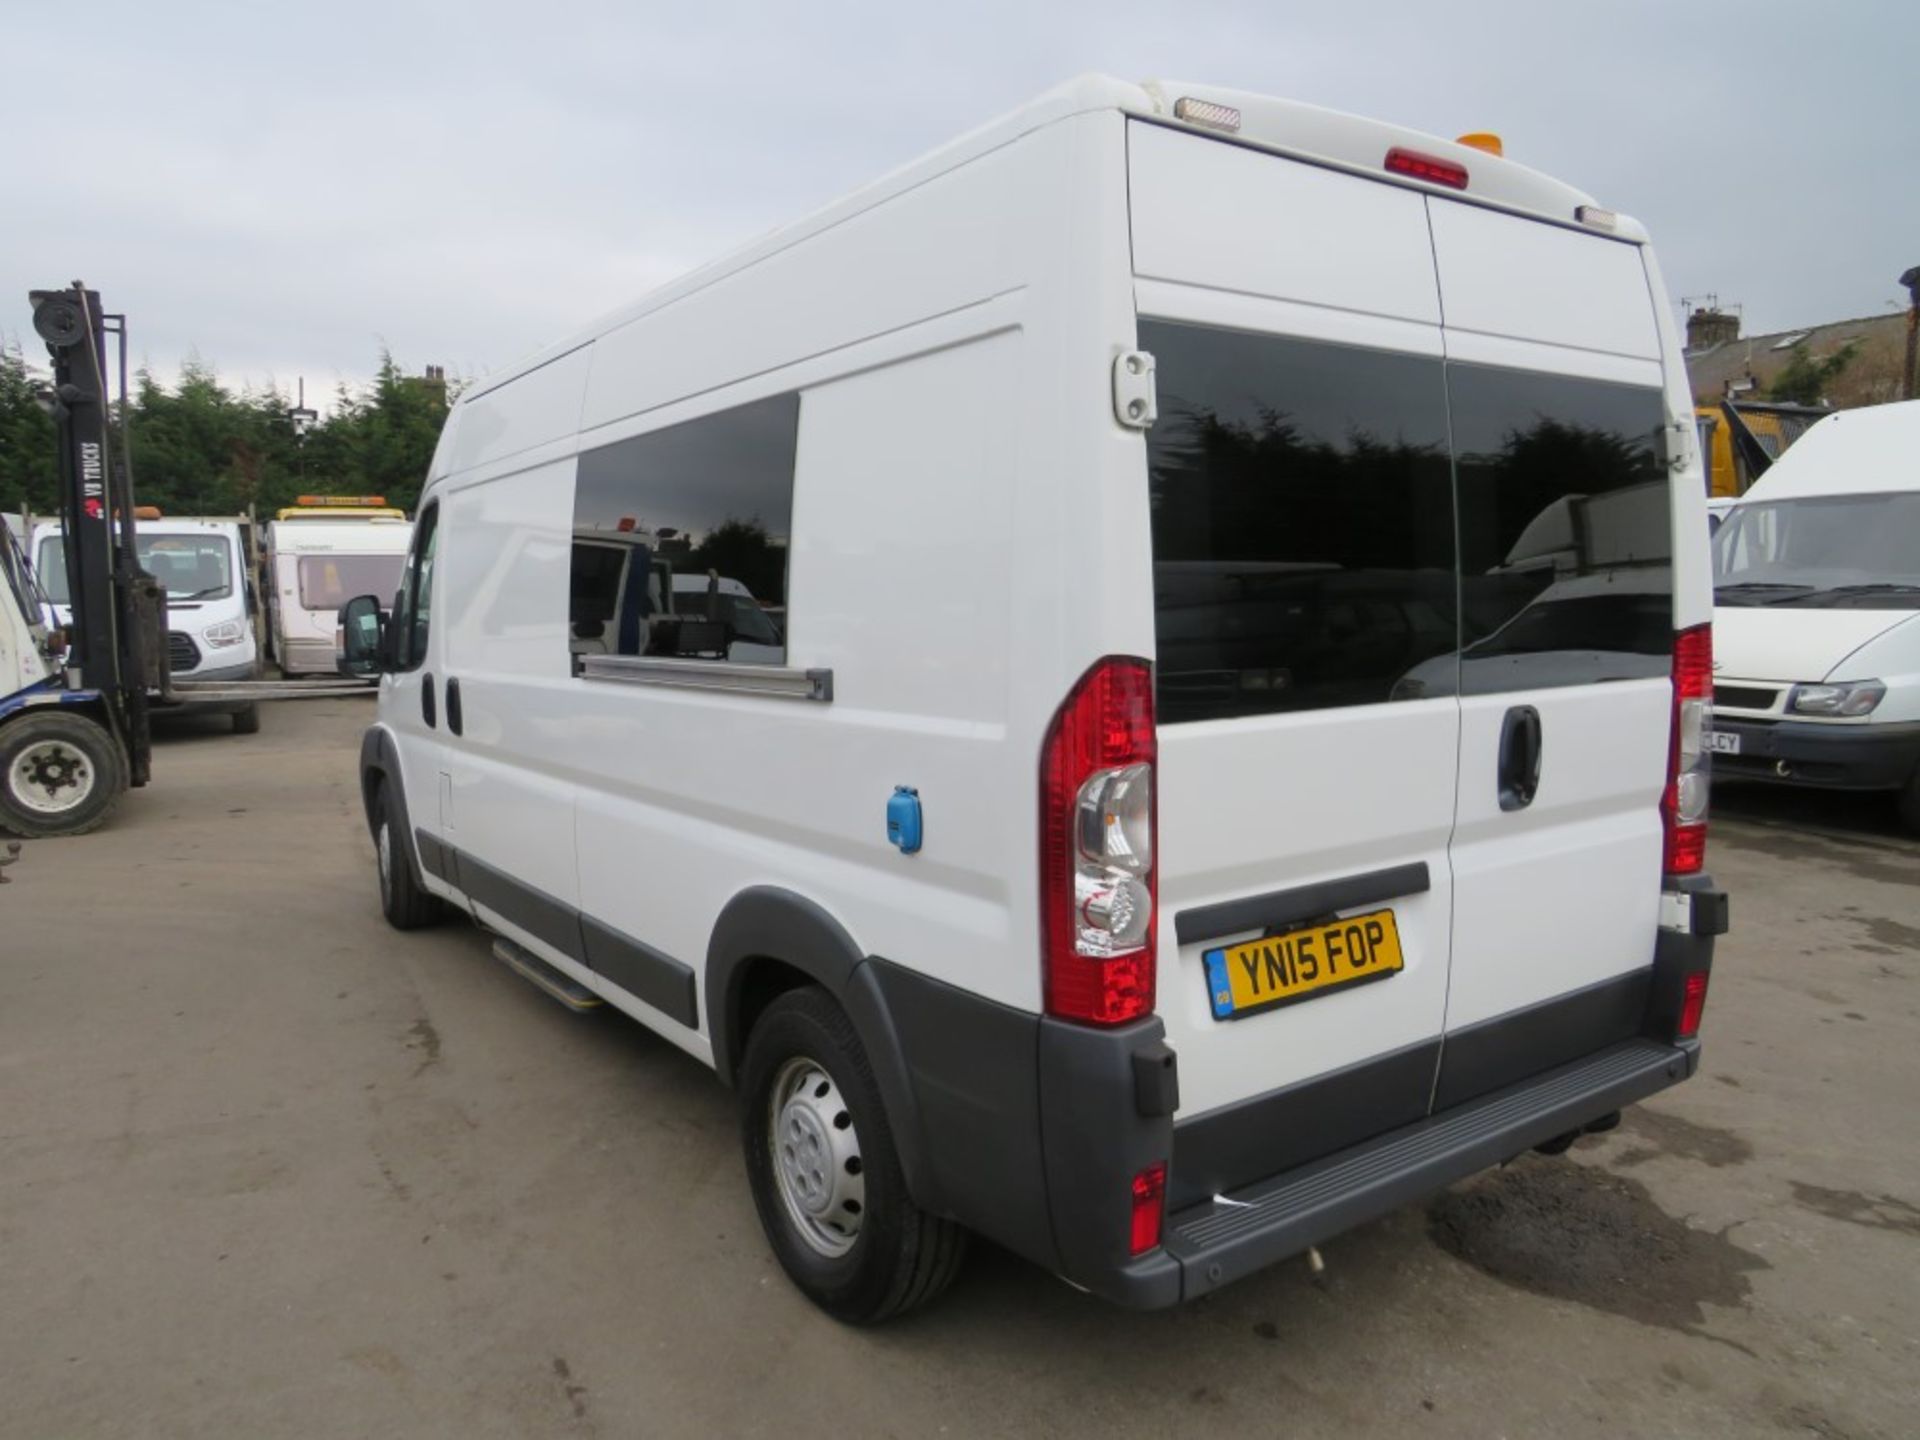 15 reg PEUGEOT BOXER 435 HDI, 1ST REG 05/15, TEST 05/20, 600M WARRANTED, V5 HERE, 1 OWNER FROM - Image 3 of 9